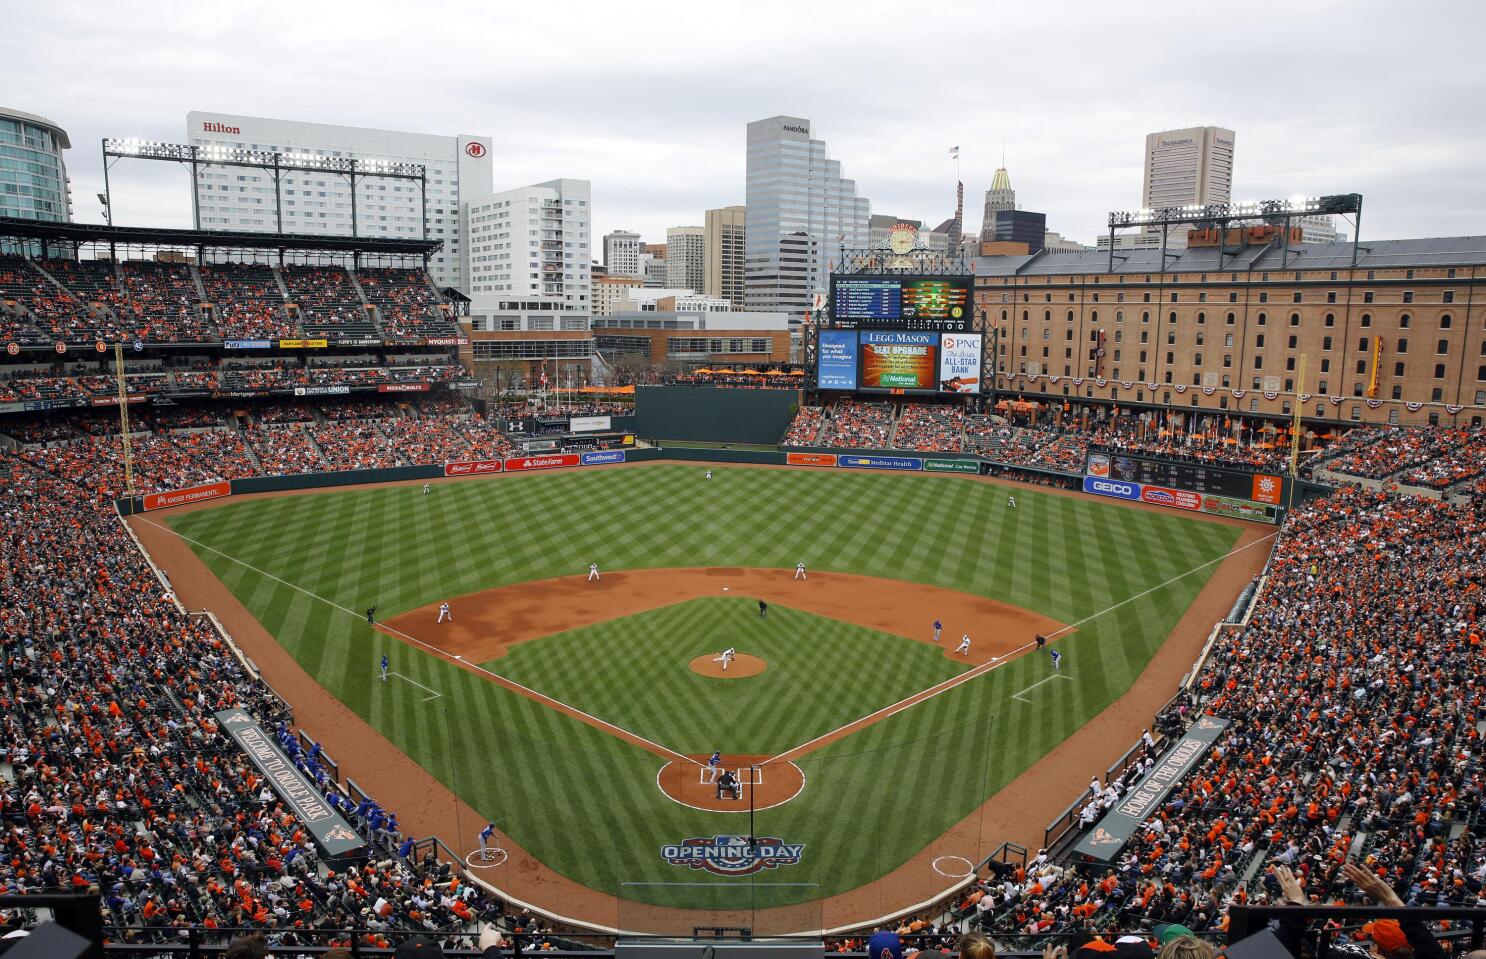 Orioles moving LF fence back at Camden Yards